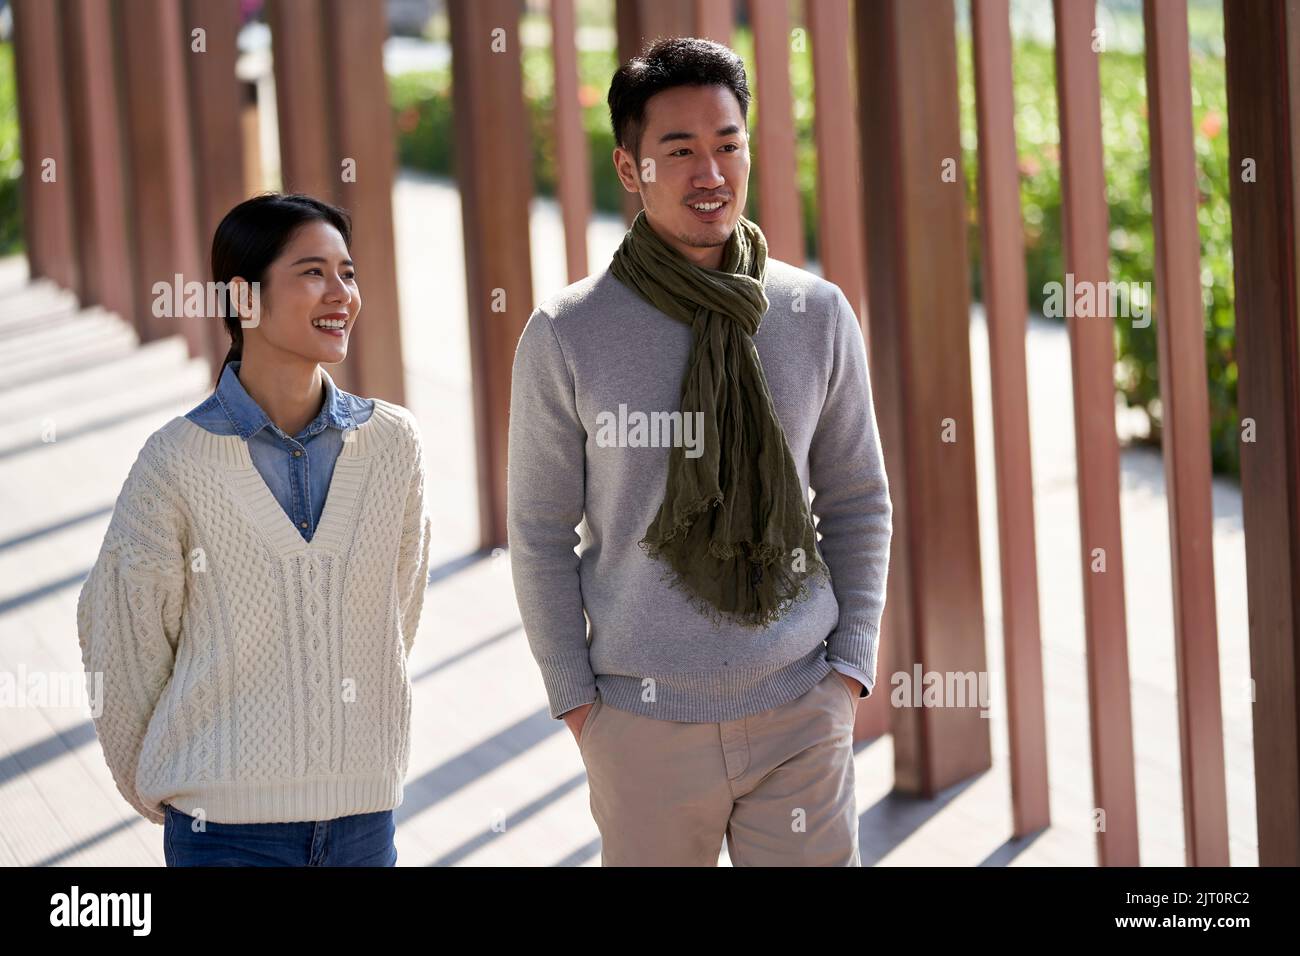 young asian dating couple walking and chatting outdoors in park happy and smiling Stock Photo